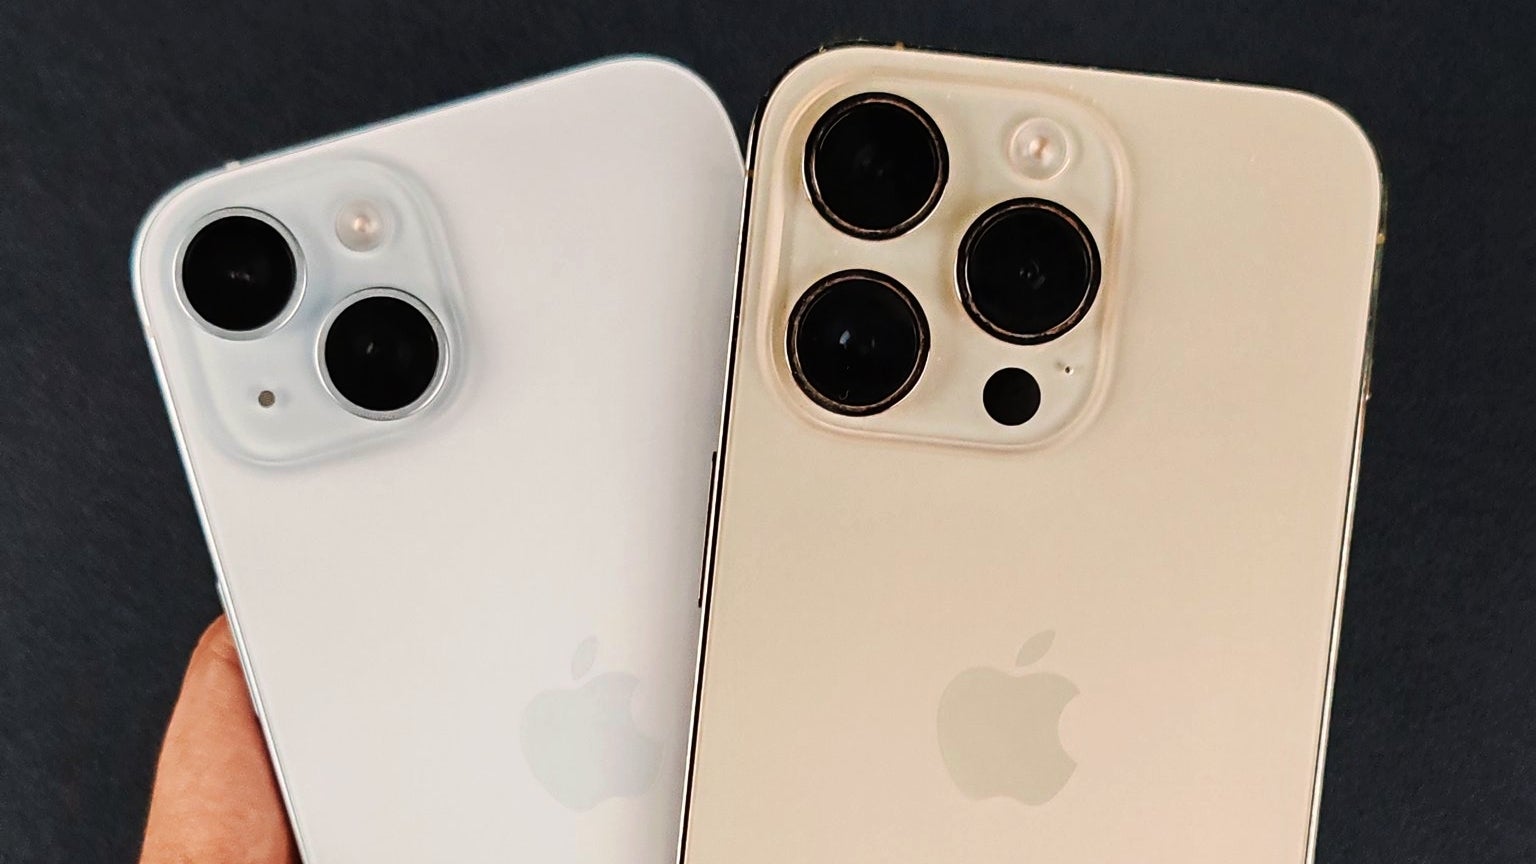 If you’re looking for a new iPhone right now, and your budget is about $800, going left is the right decision. - iPhone 15 or iPhone 14 Pro: Shocking but true - going &quot;Pro&quot; is the biggest mistake you can make